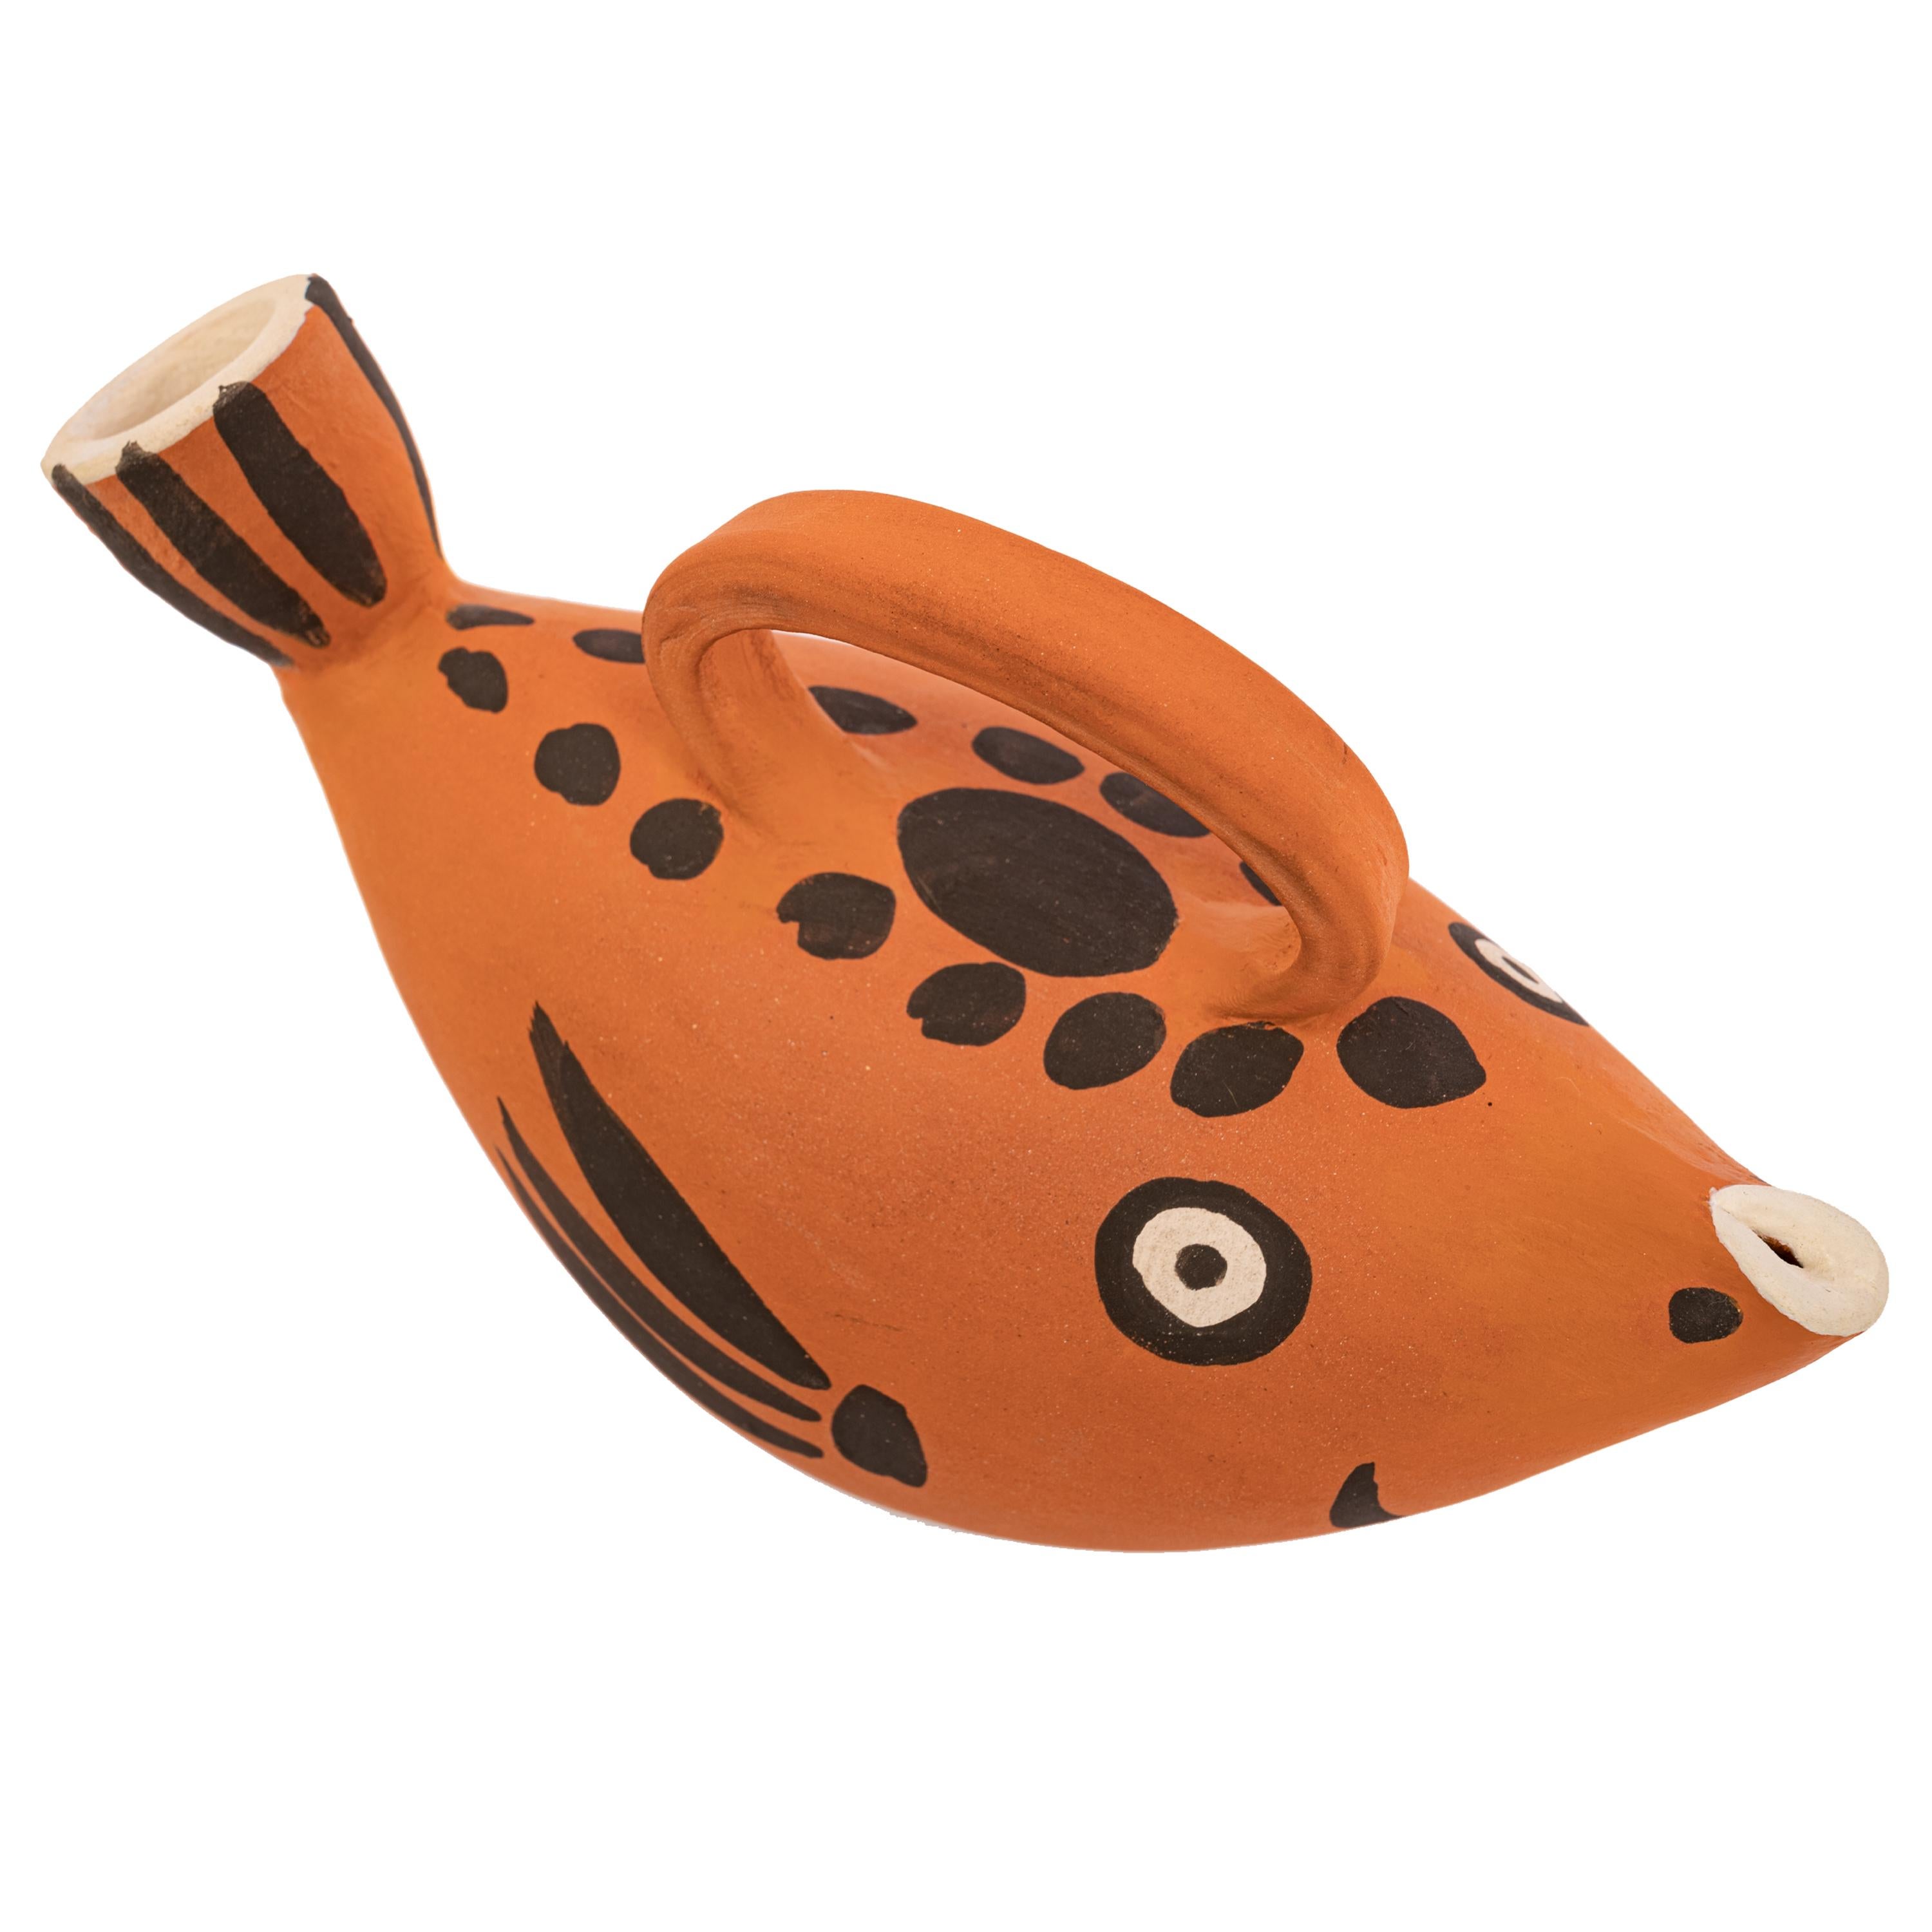 Pablo Picasso Terracotta Fish Pitcher Madoura Pottery Sujet Poisson France 1952  For Sale 2